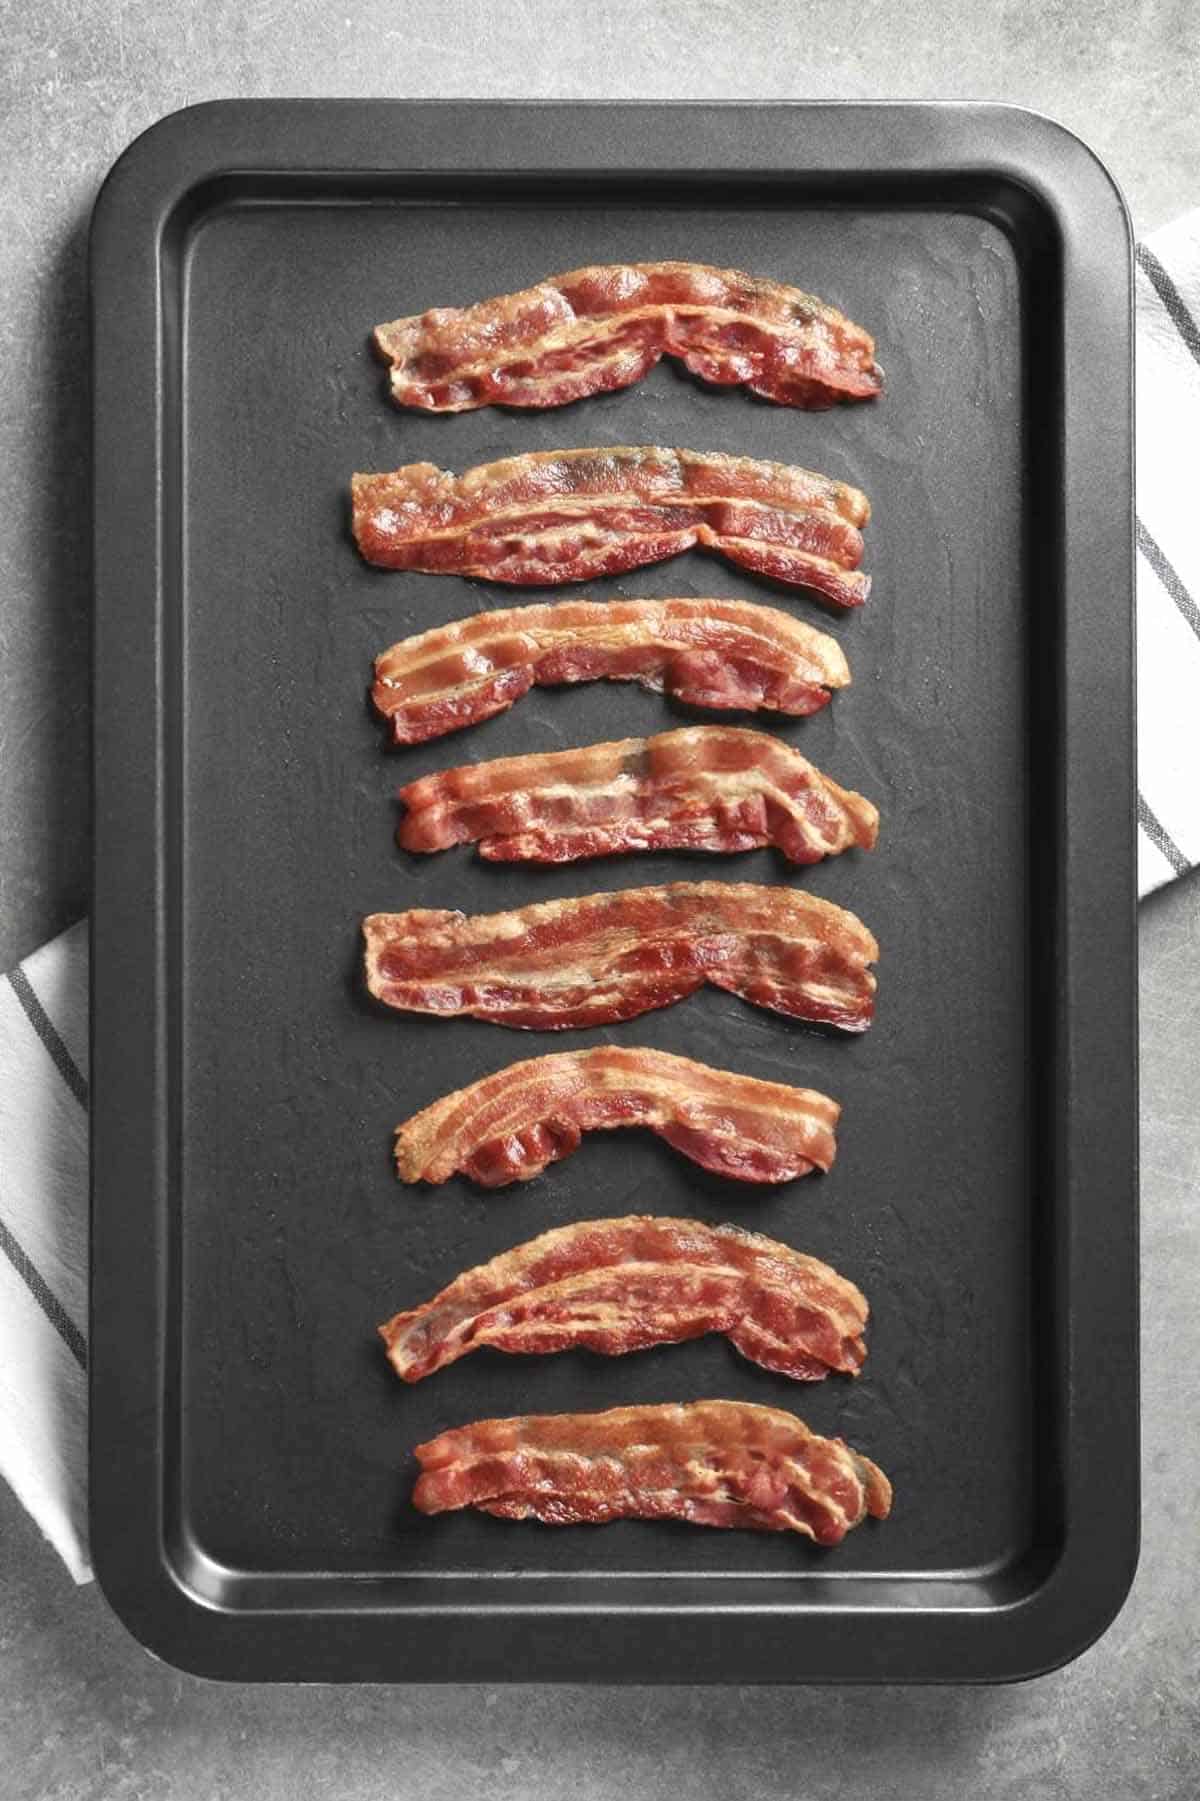 8 strips of cooked bacon on a baking sheet.